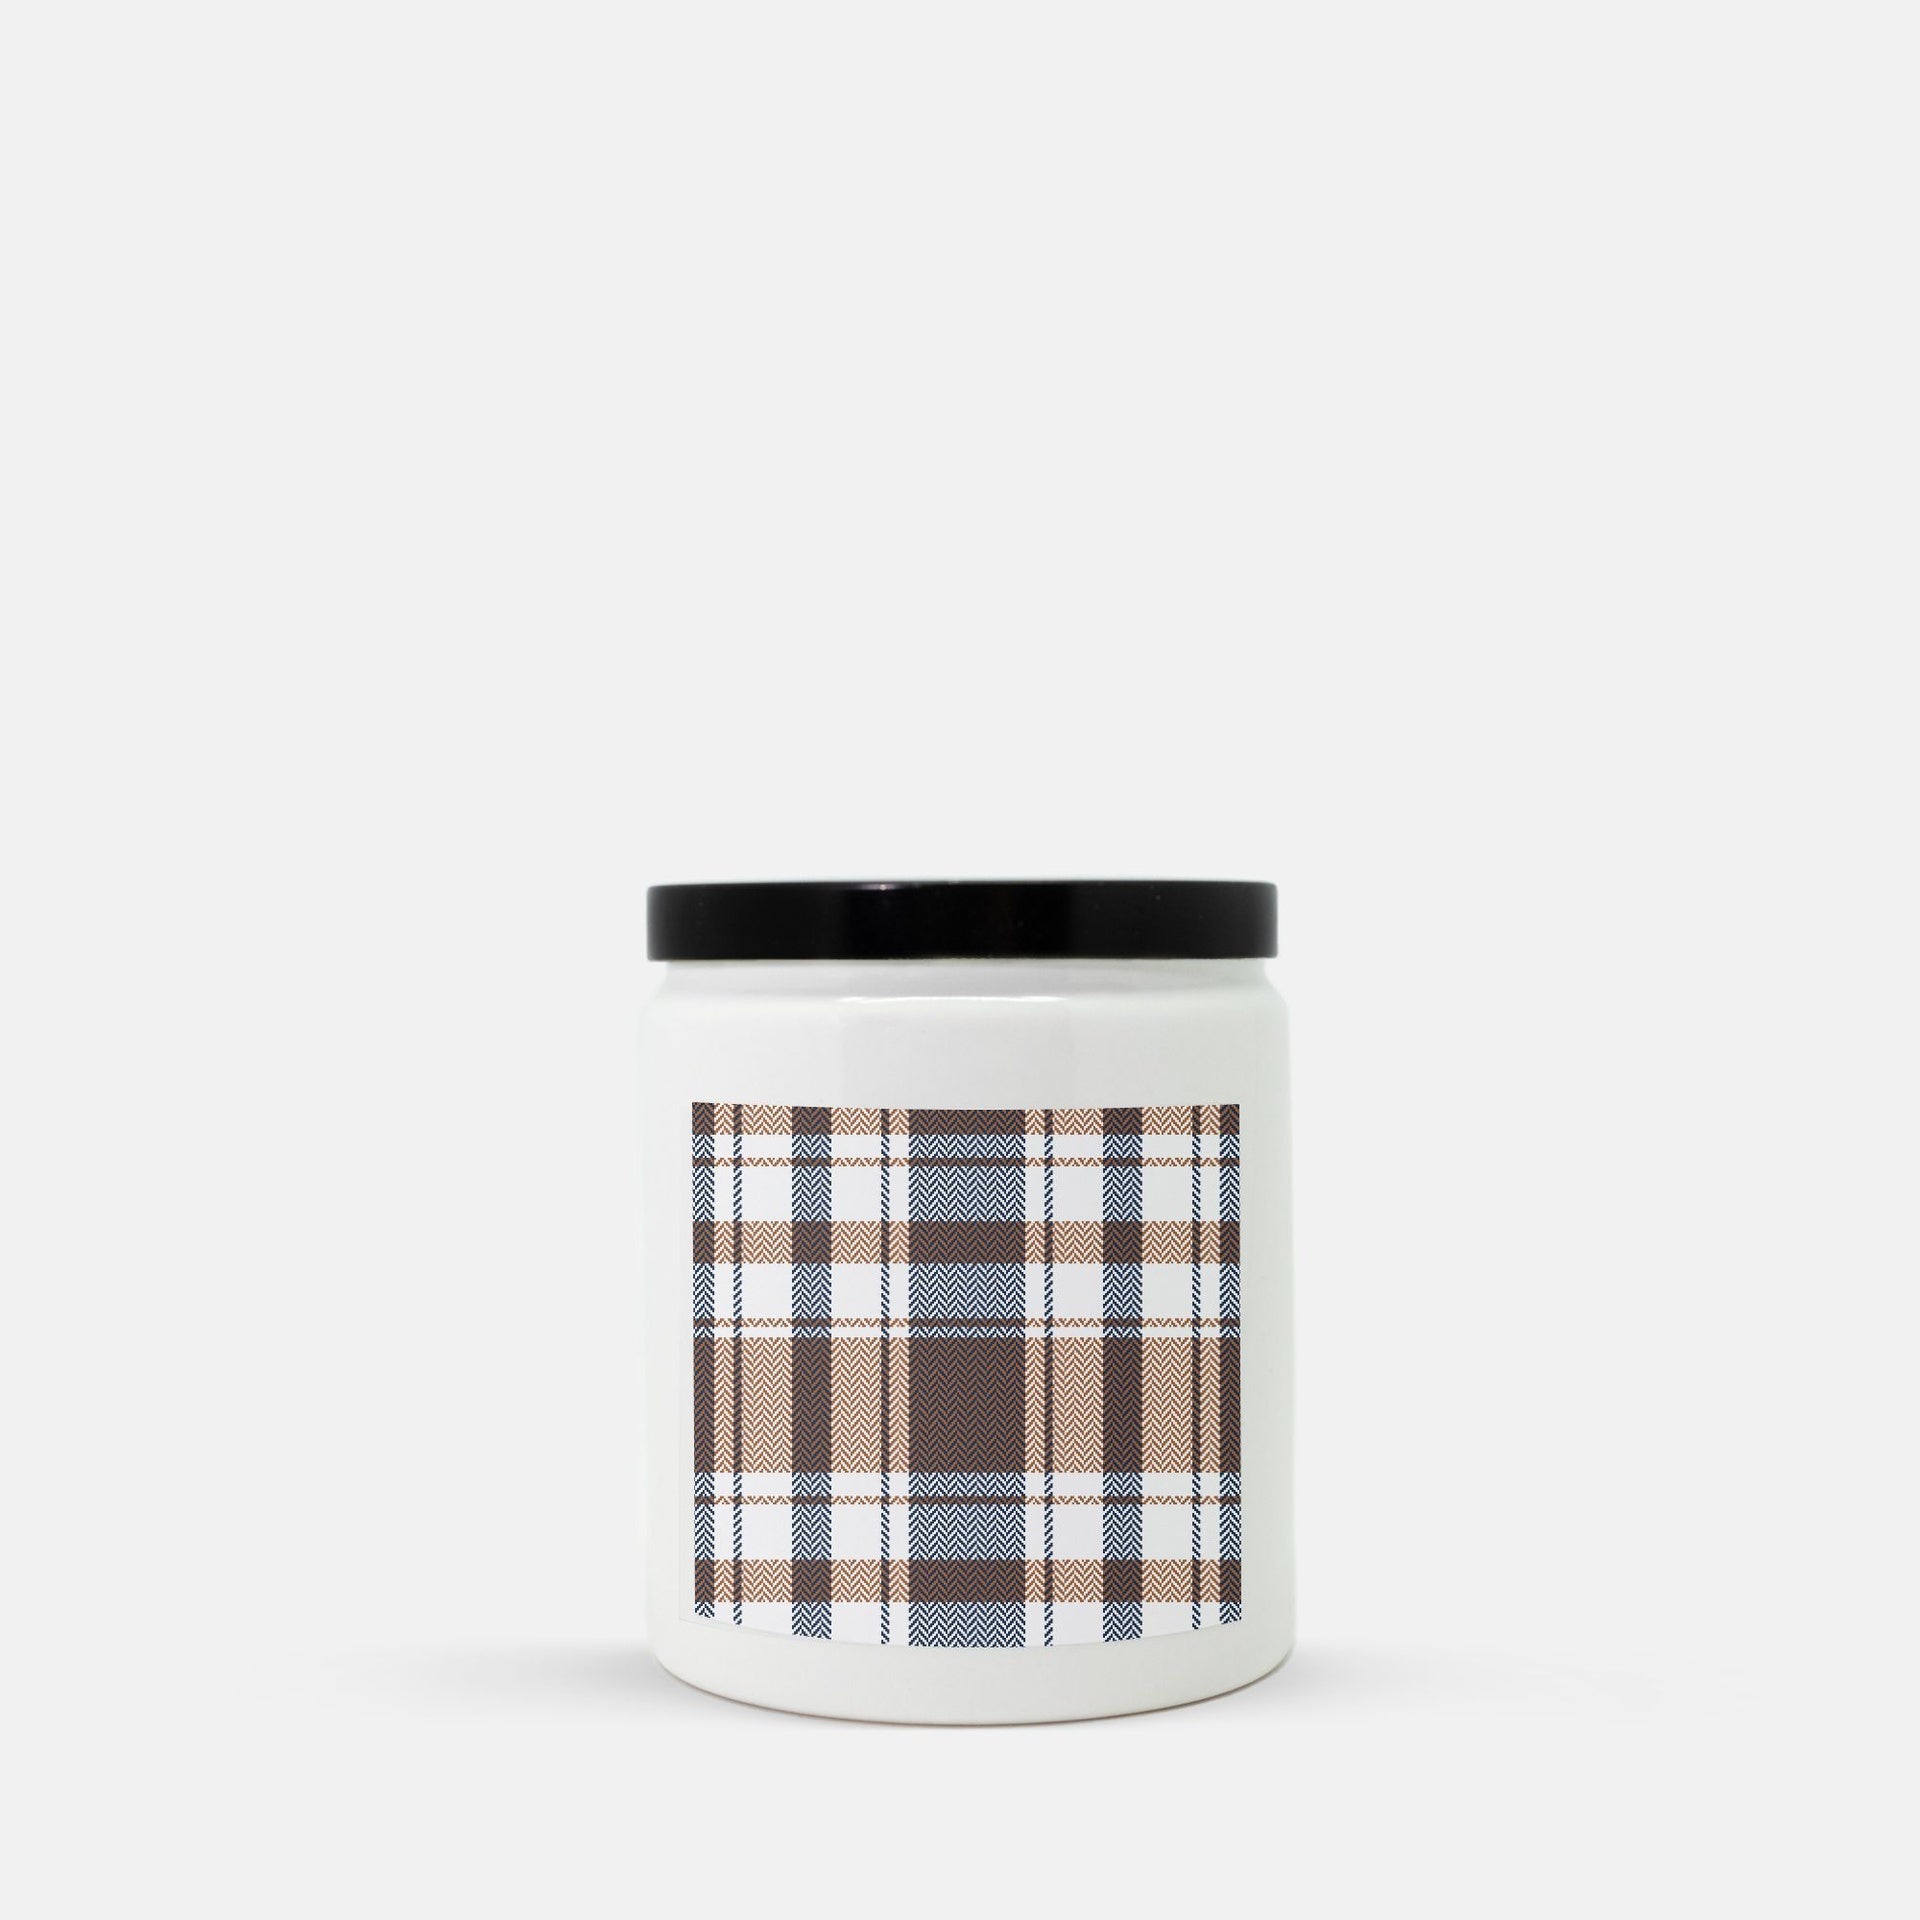 Lifestyle Details - Navy & Brown Plaid Ceramic Candle w Gold Lid - Vanilla Bean